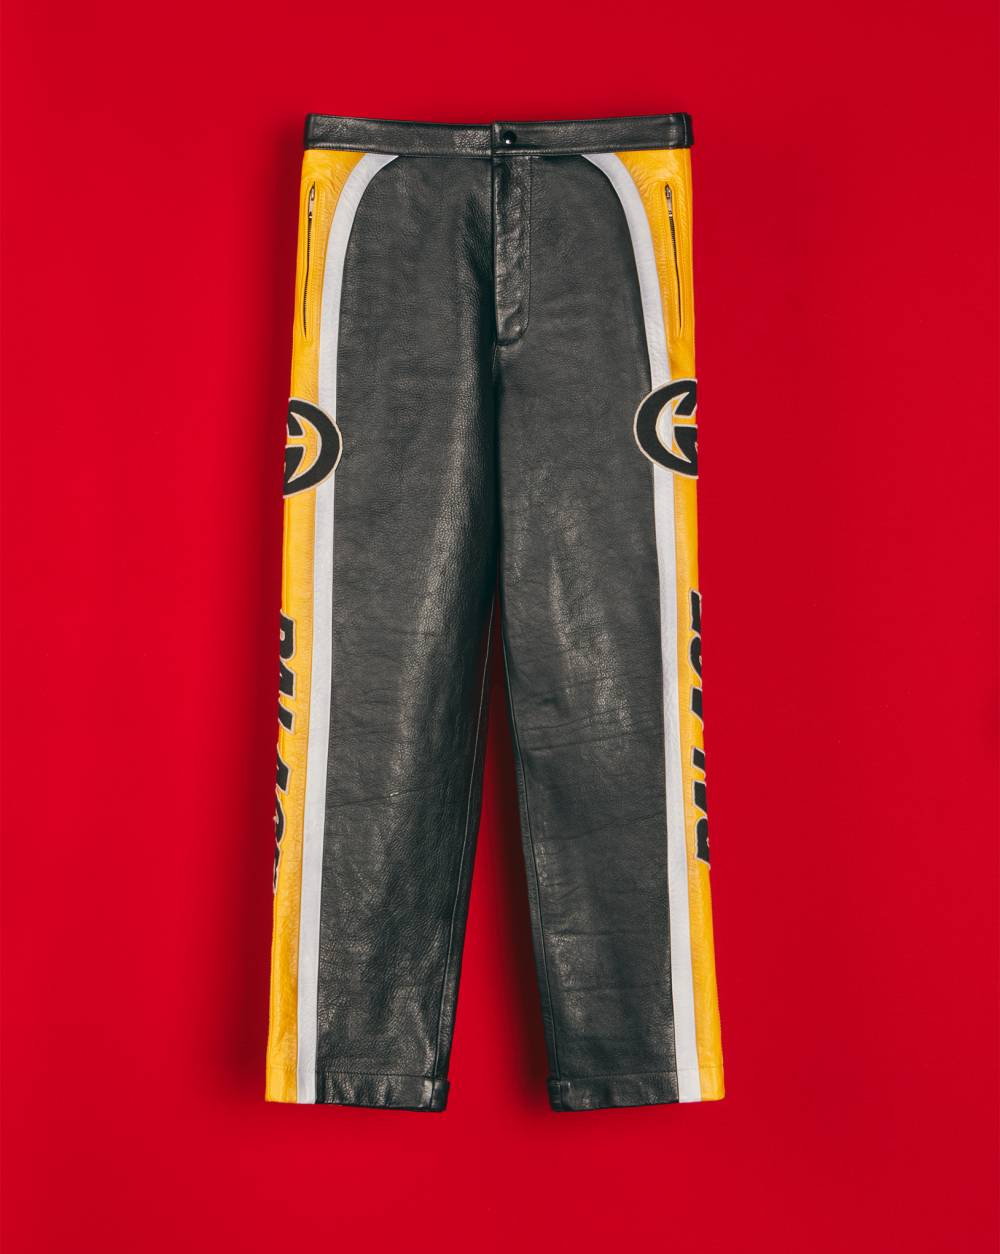 Leather pants with patches by Palace Gucci